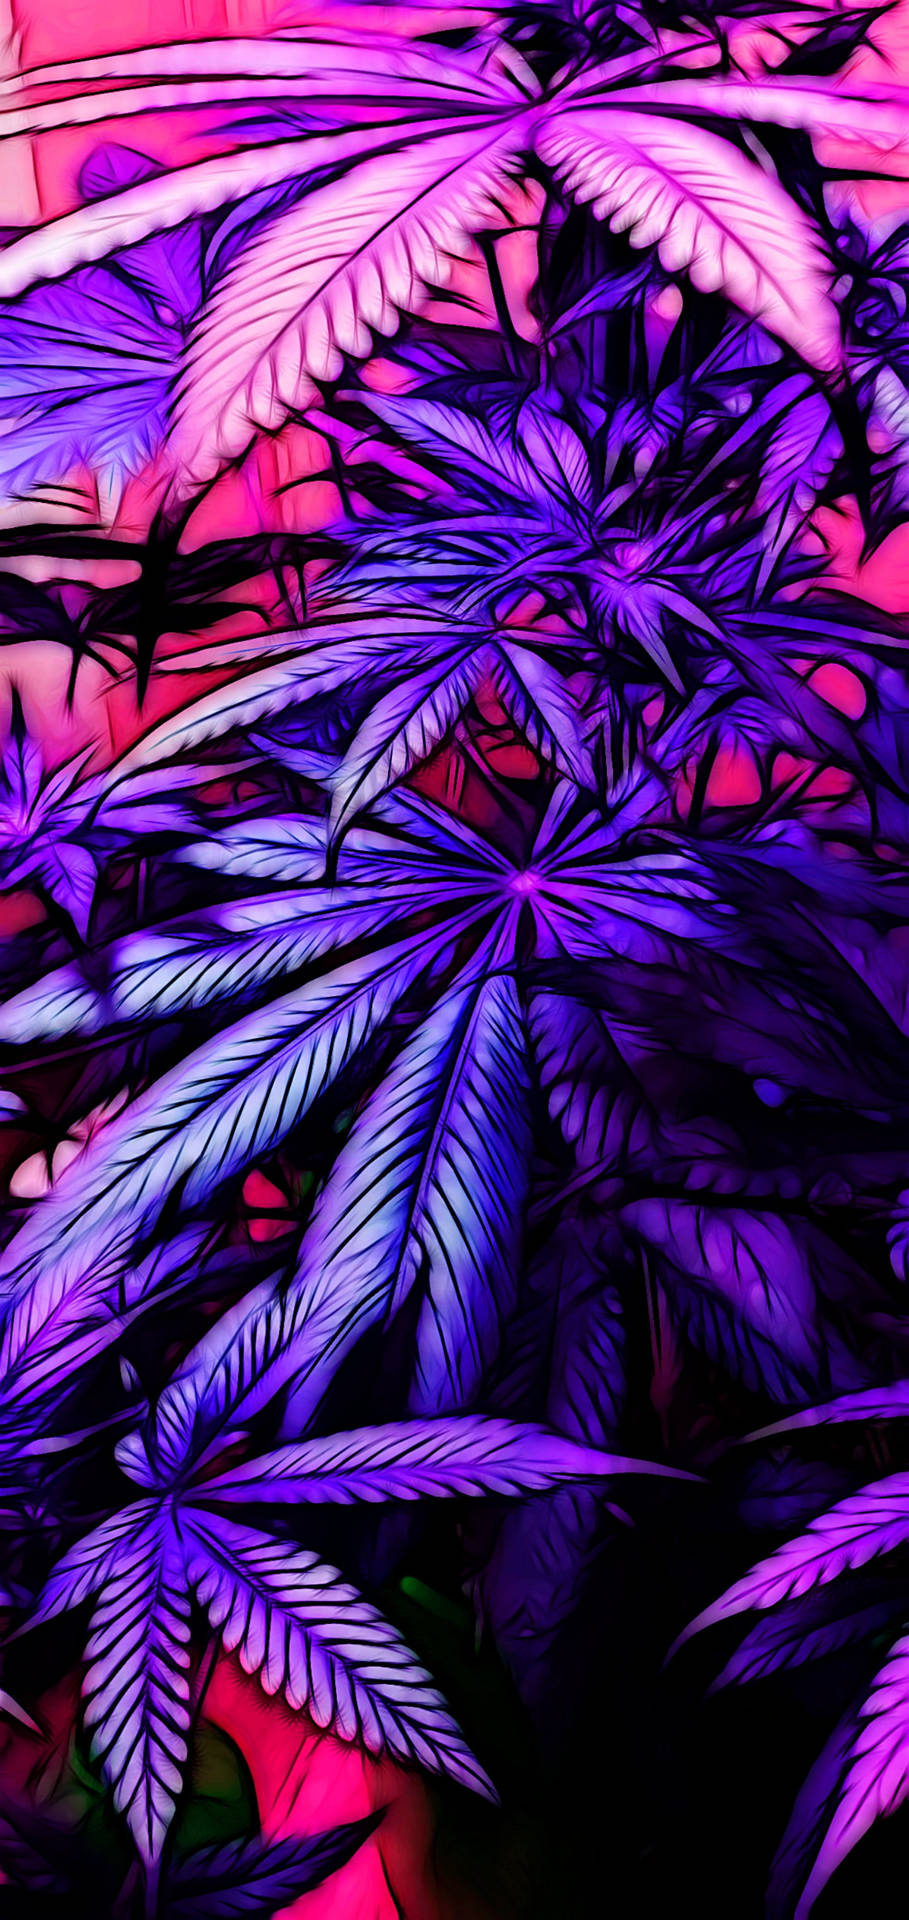 Neon Weed Aesthetic for iPhone Wallpaper